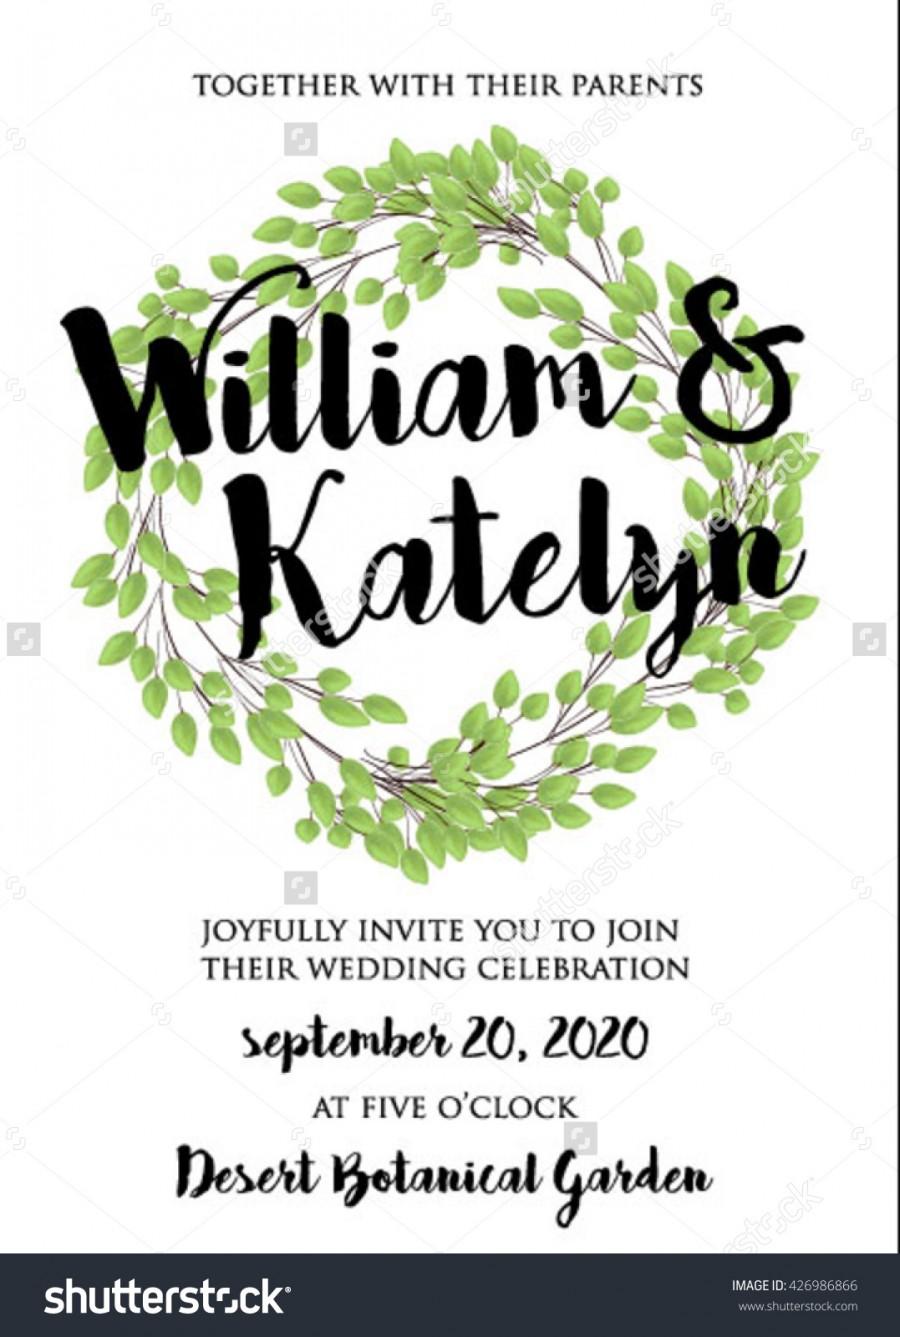 Hochzeit - Wedding invitation, thank you card, save the date cards. Wedding set. RSVP card Vector hand drawn watercolor laurel wreath. Template with green branches,leaves wreath,laurels